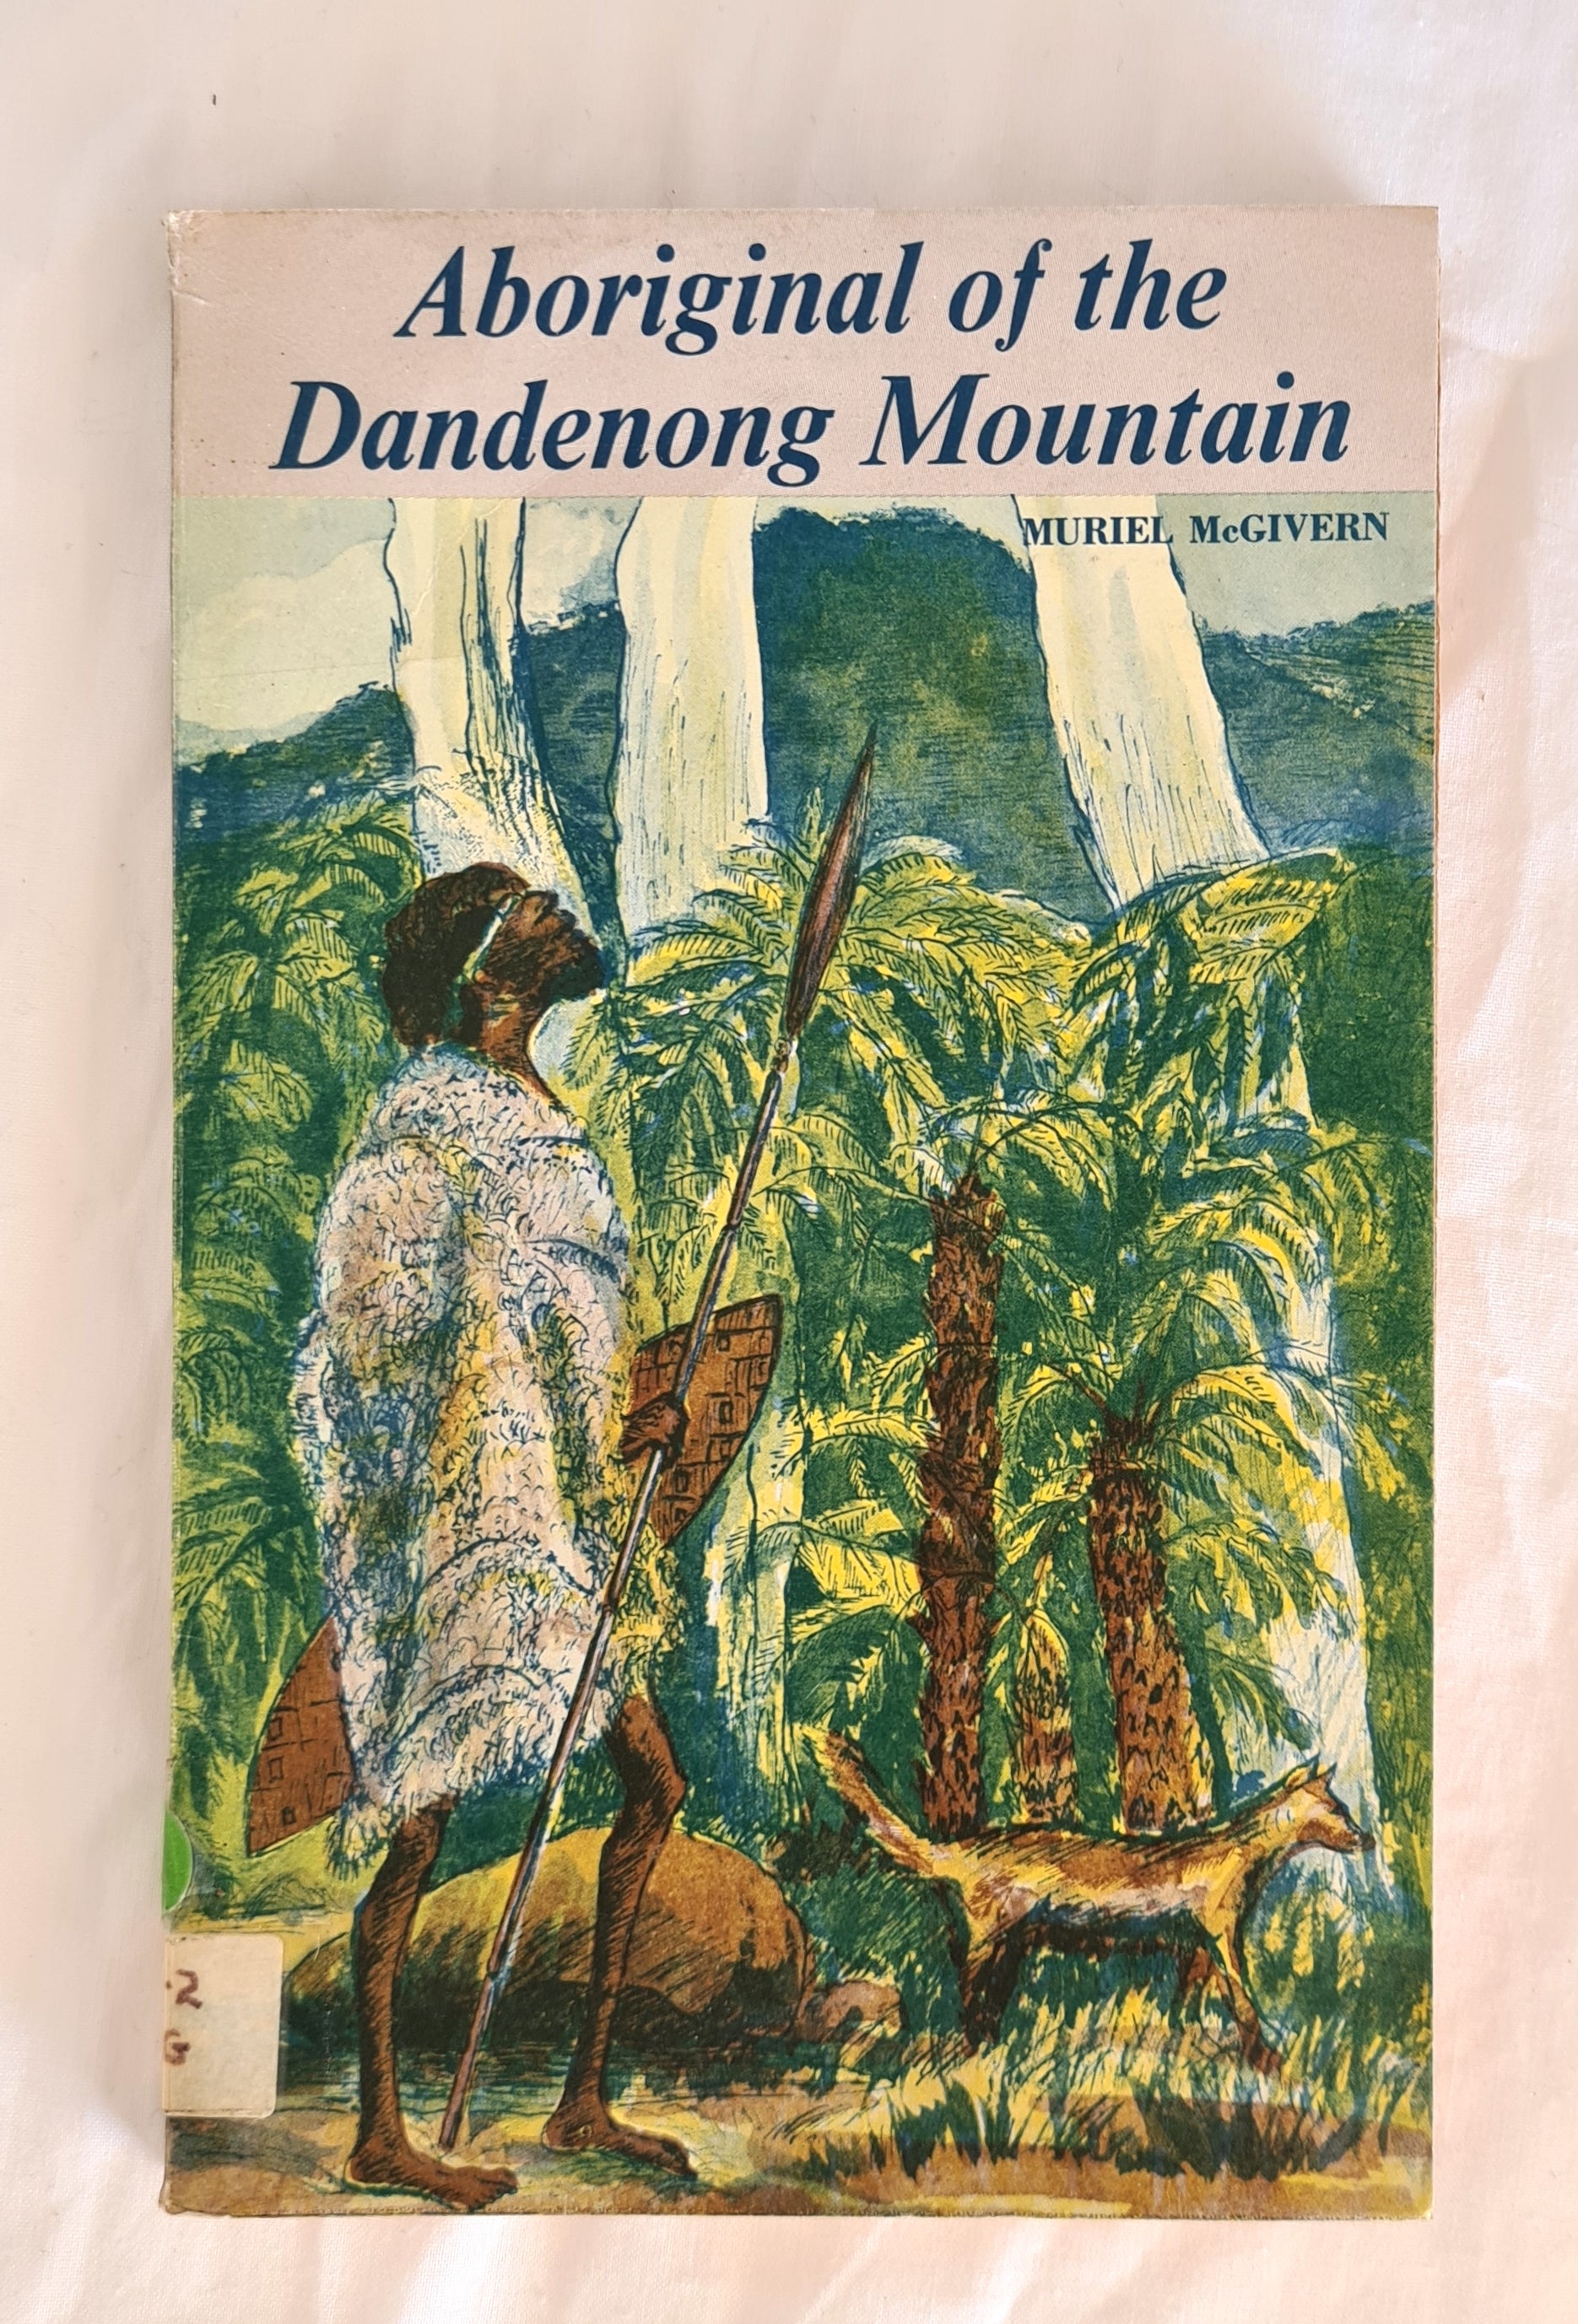 Aboriginal of the Dandenong Mountain by Muriel McGivern